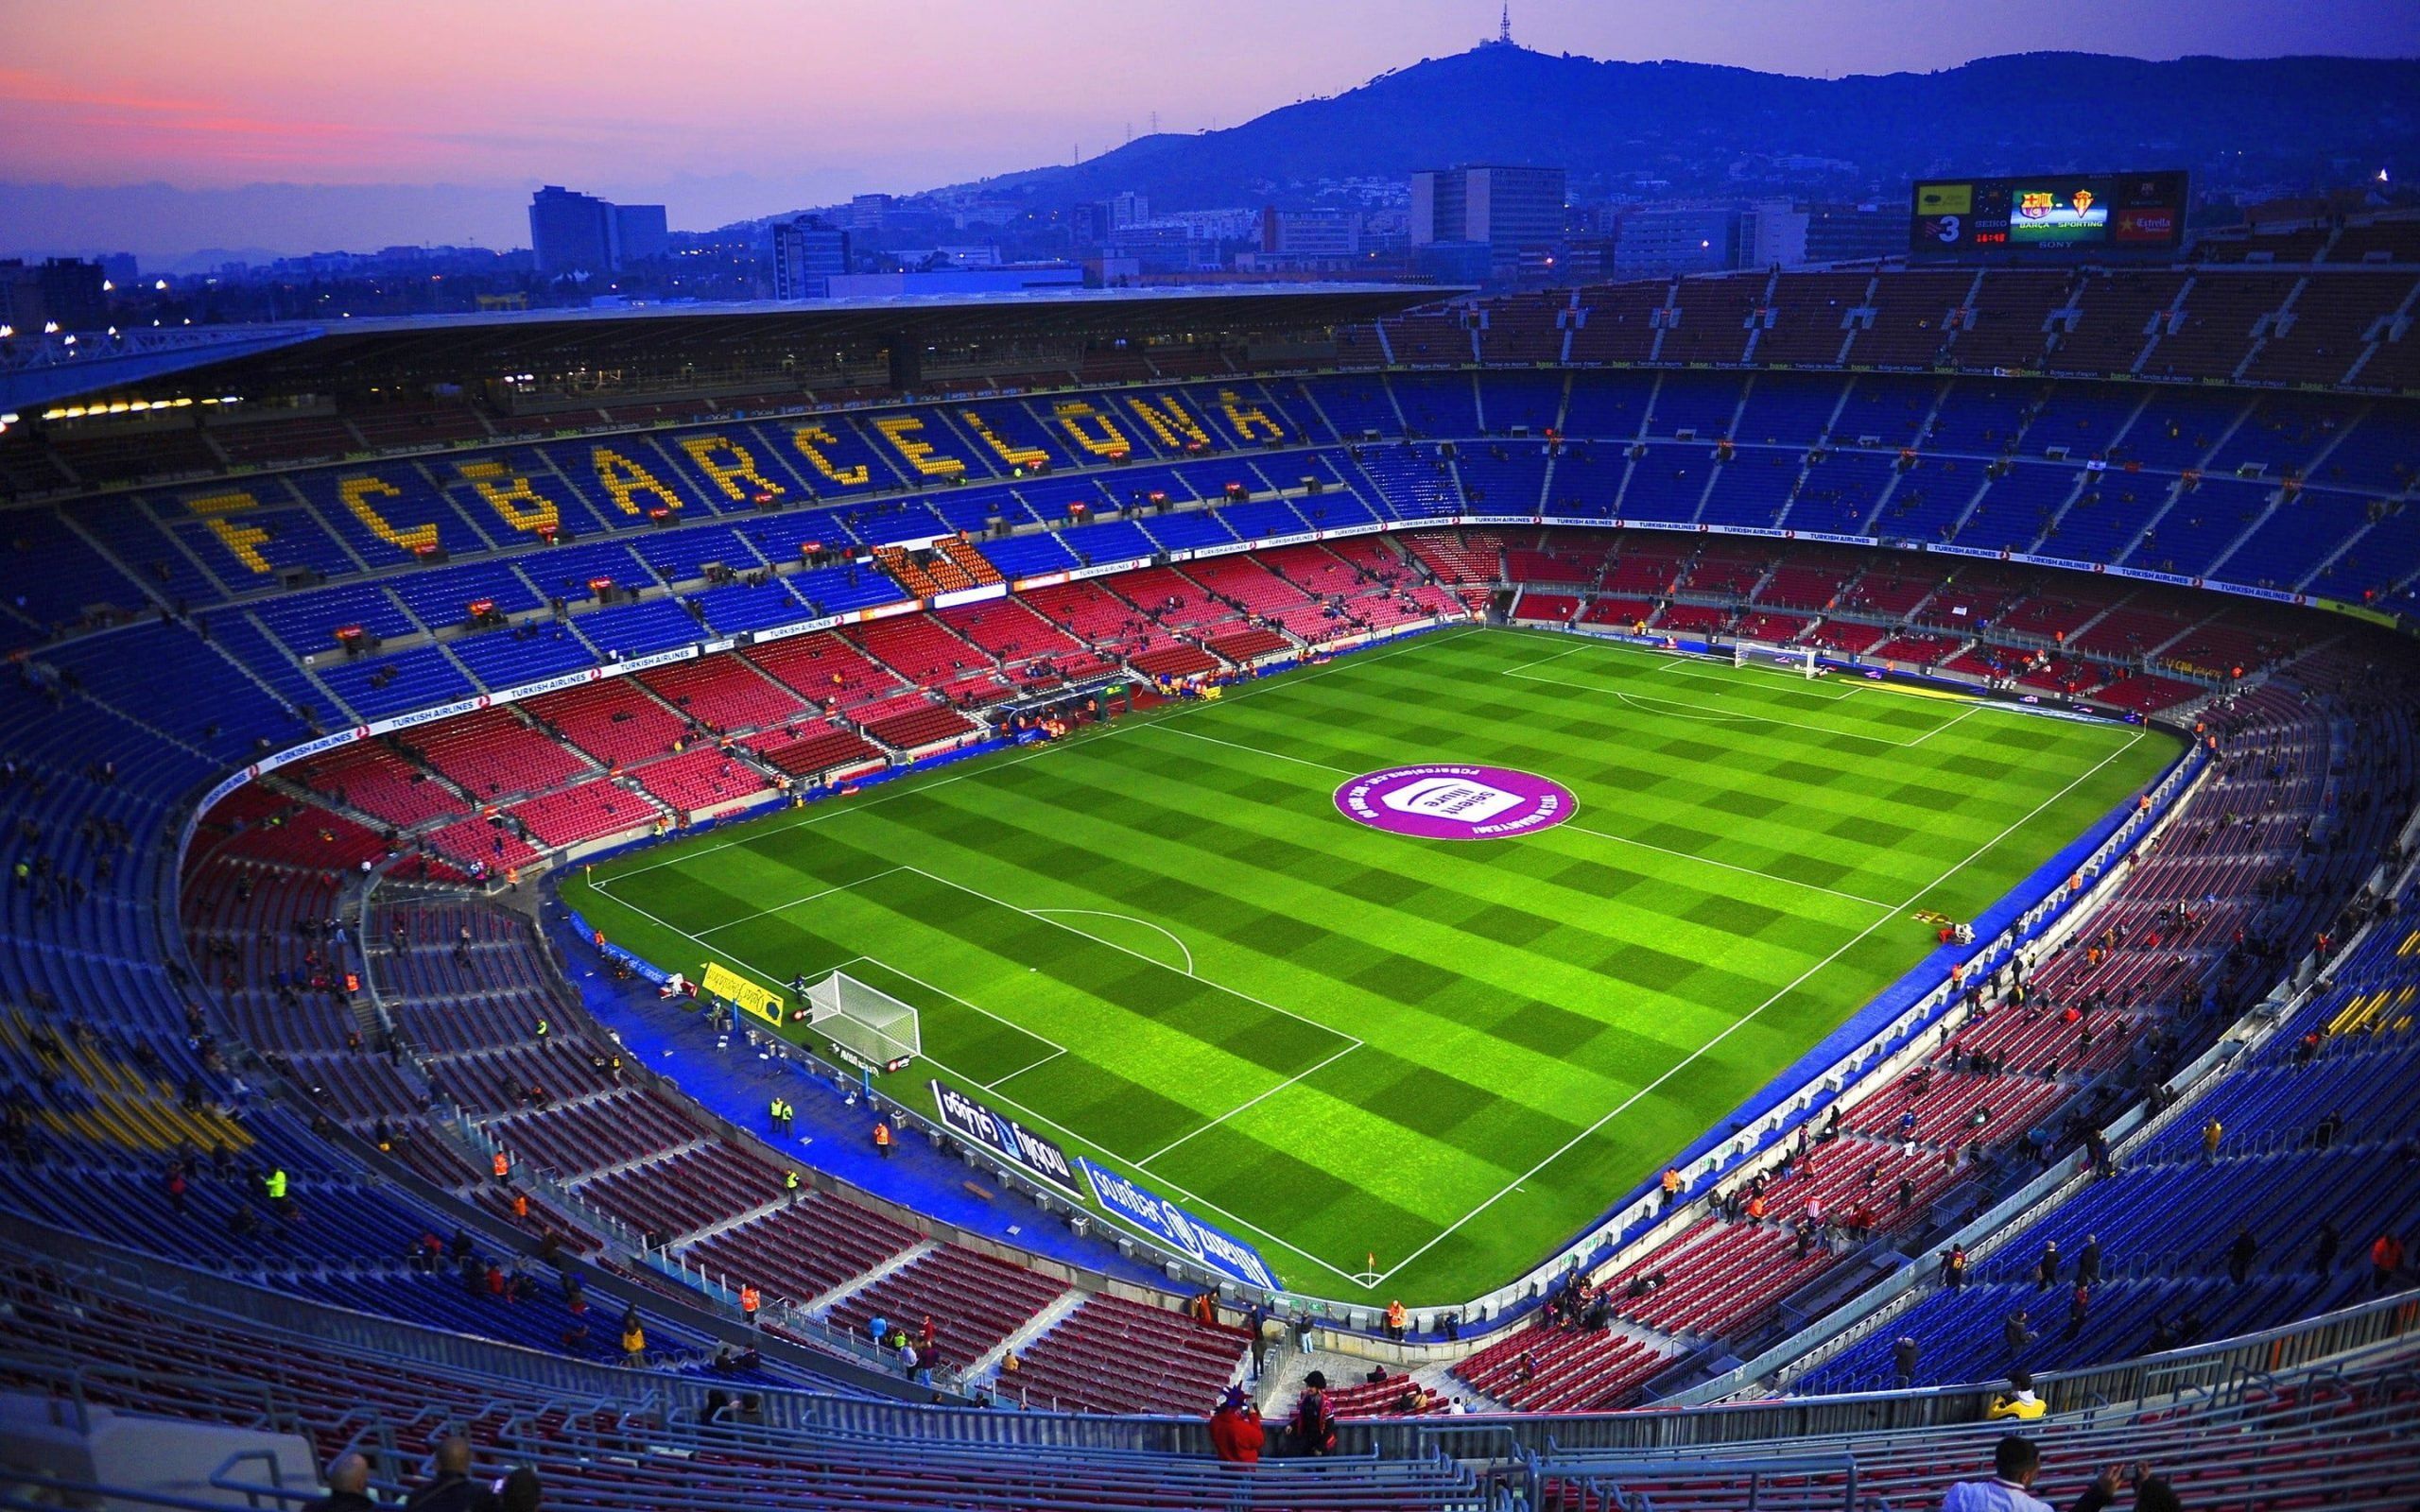 The Camp Nou stadium in Barcelona, Spain, is home to the world-famous soccer team. - Soccer